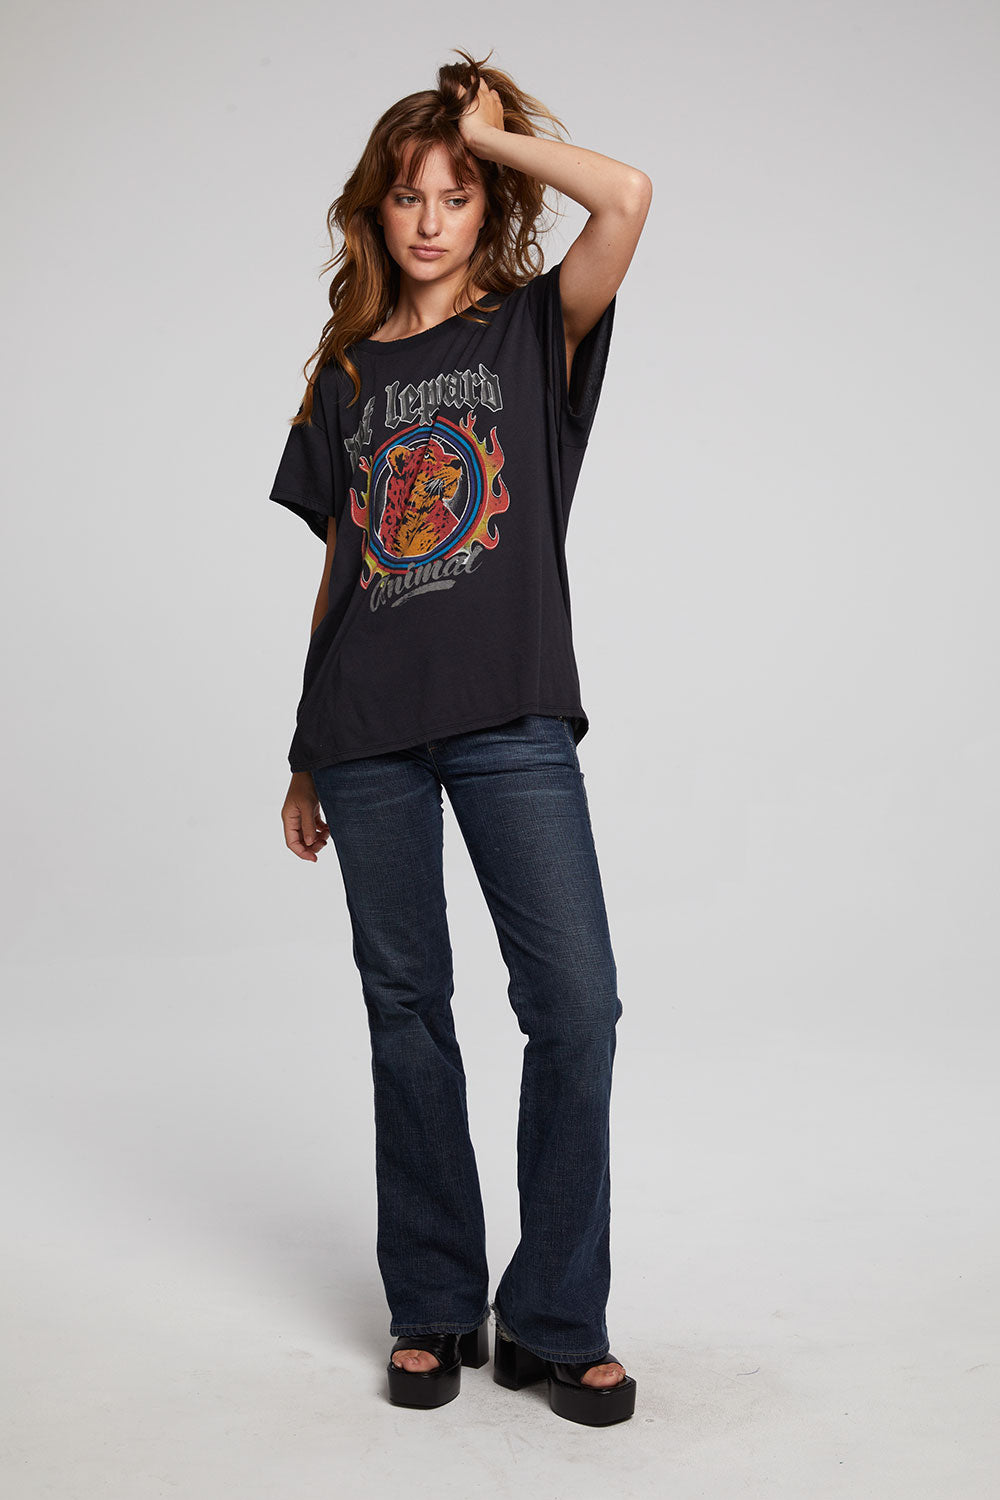 Def Leppard Animal Tee WOMENS chaserbrand